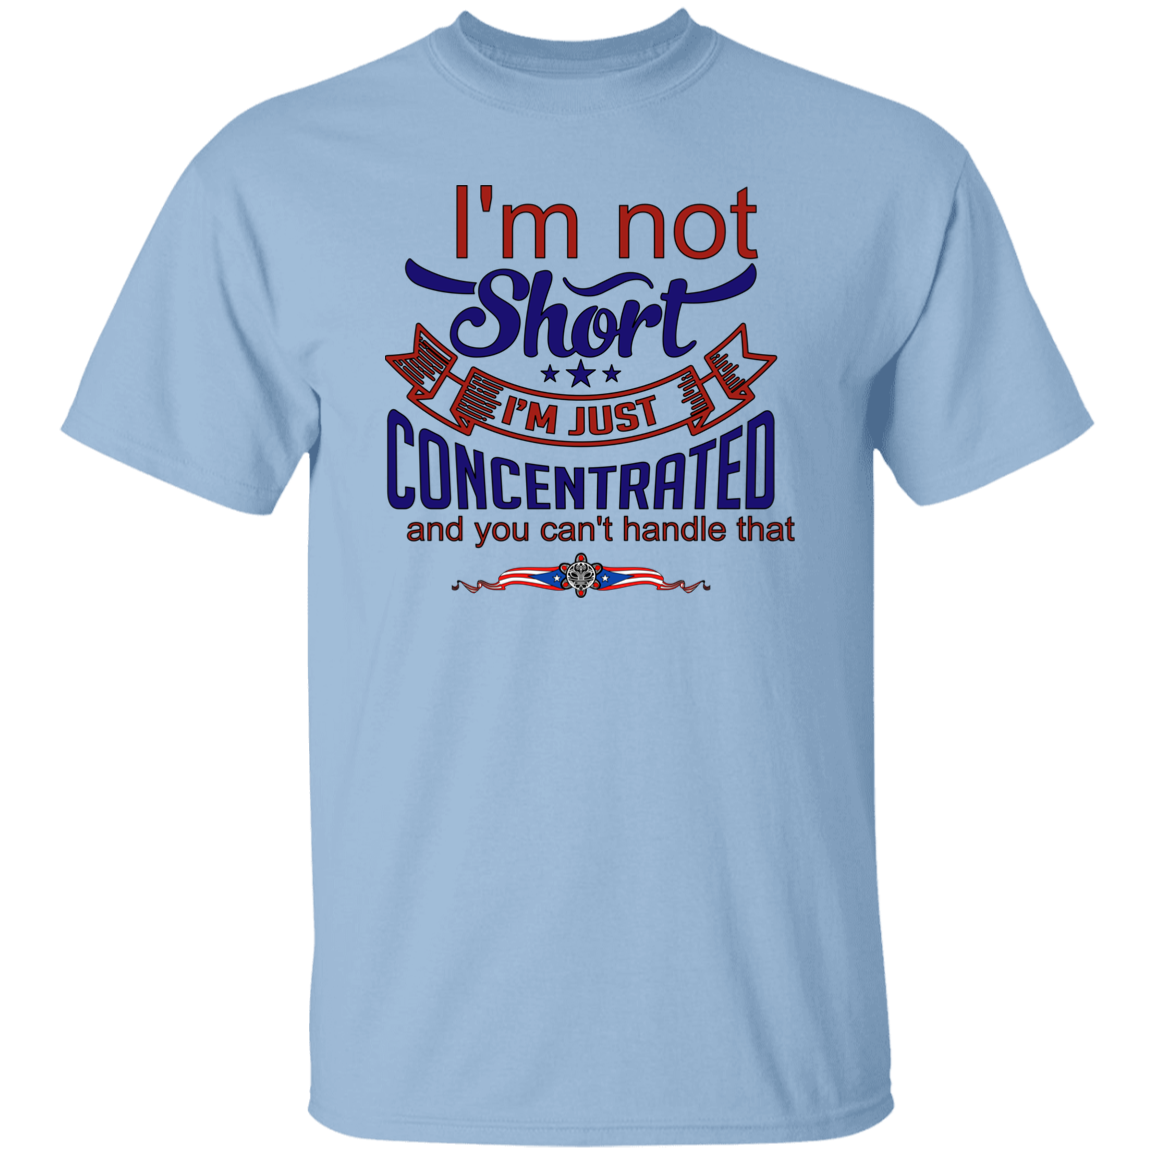 I'm Not Short, Just Concentrated 5.3 oz. T-Shirt